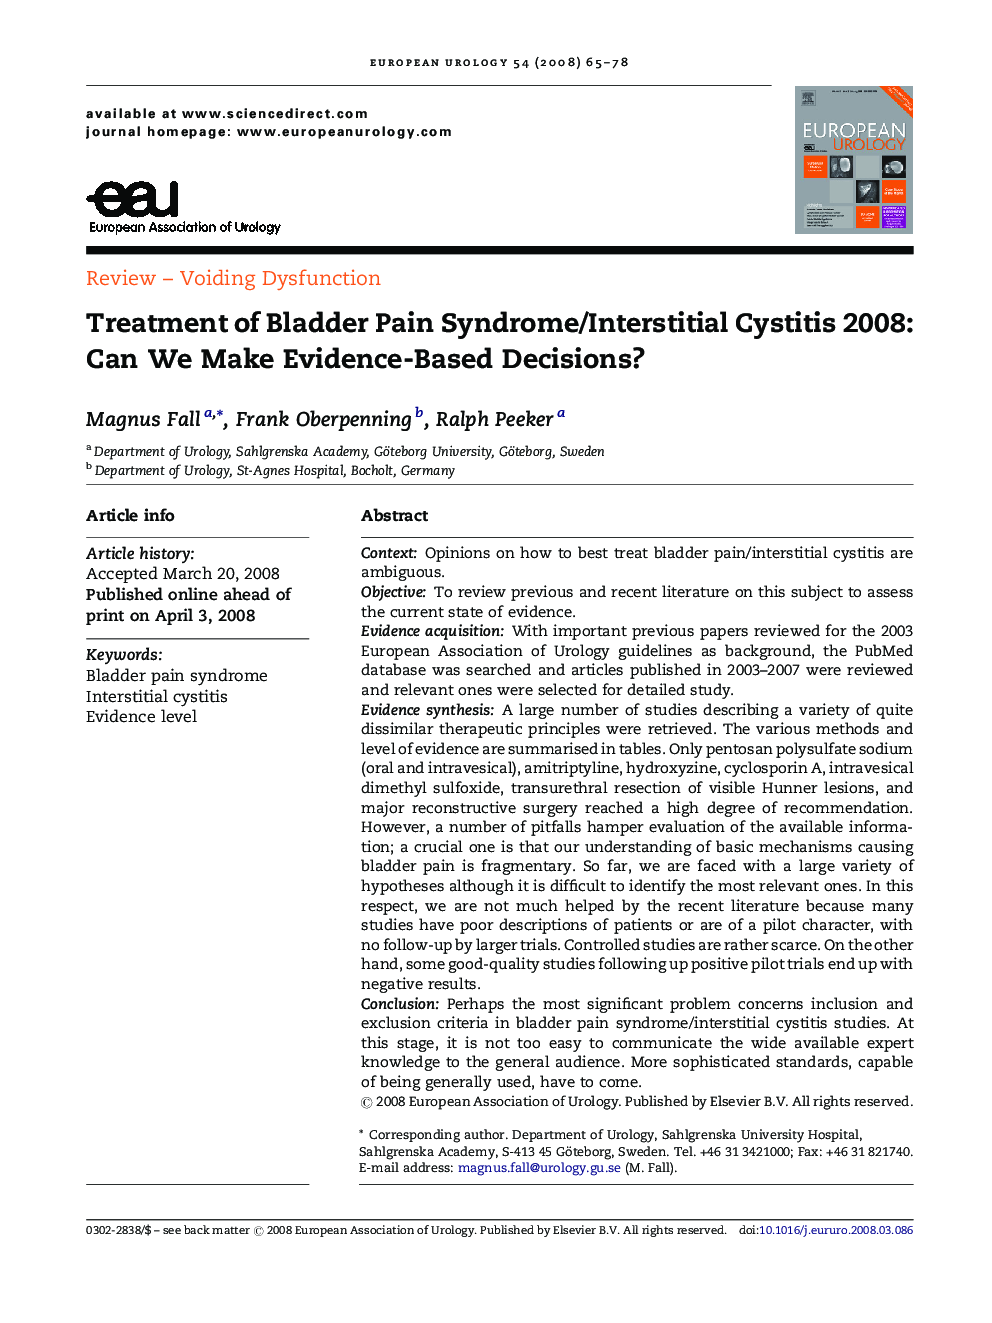 Treatment of Bladder Pain Syndrome/Interstitial Cystitis 2008: Can We Make Evidence-Based Decisions?